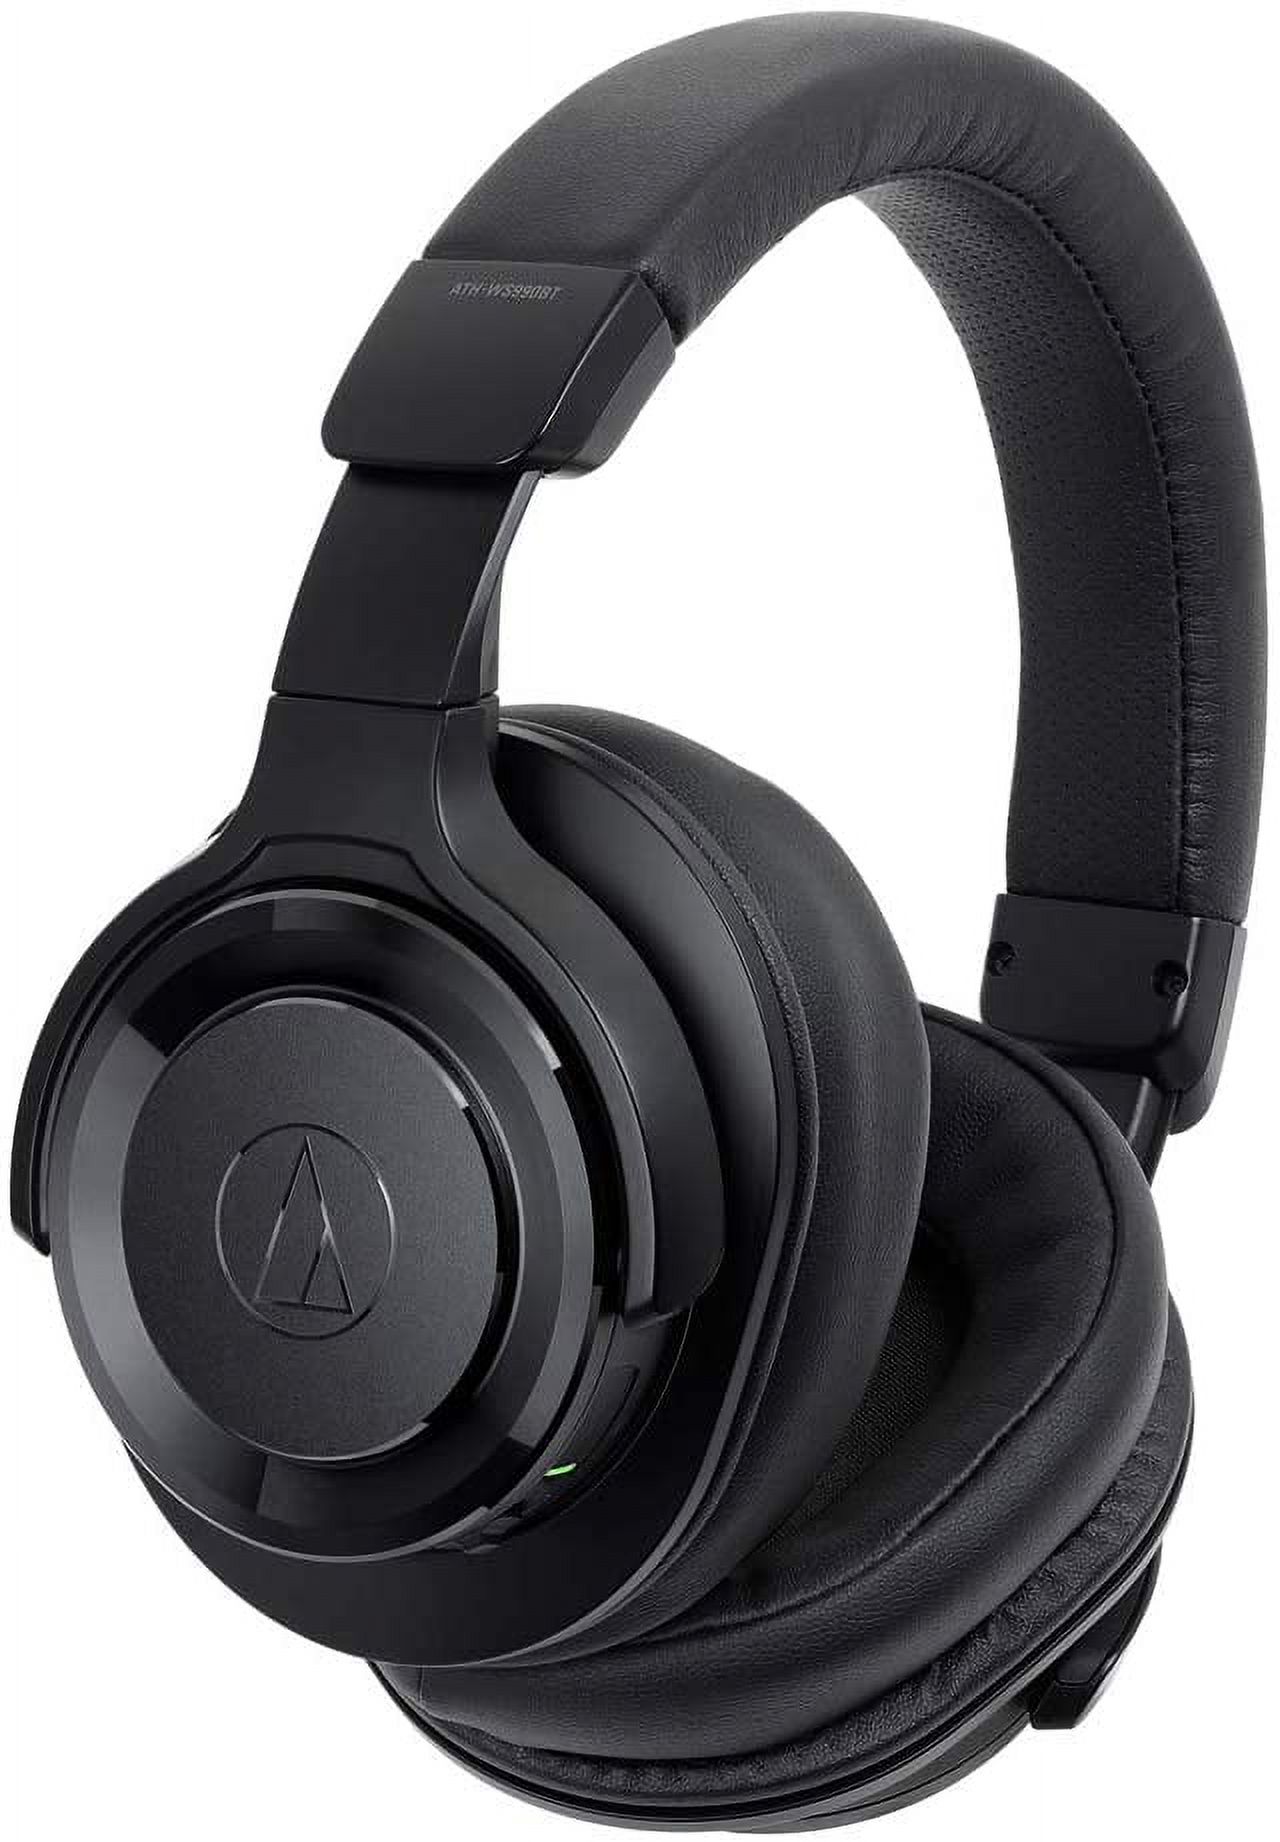 Audio-Technica Bluetooth Noise-Canceling Over-Ear Headphones, Black, ATH-WS990BT - image 1 of 5